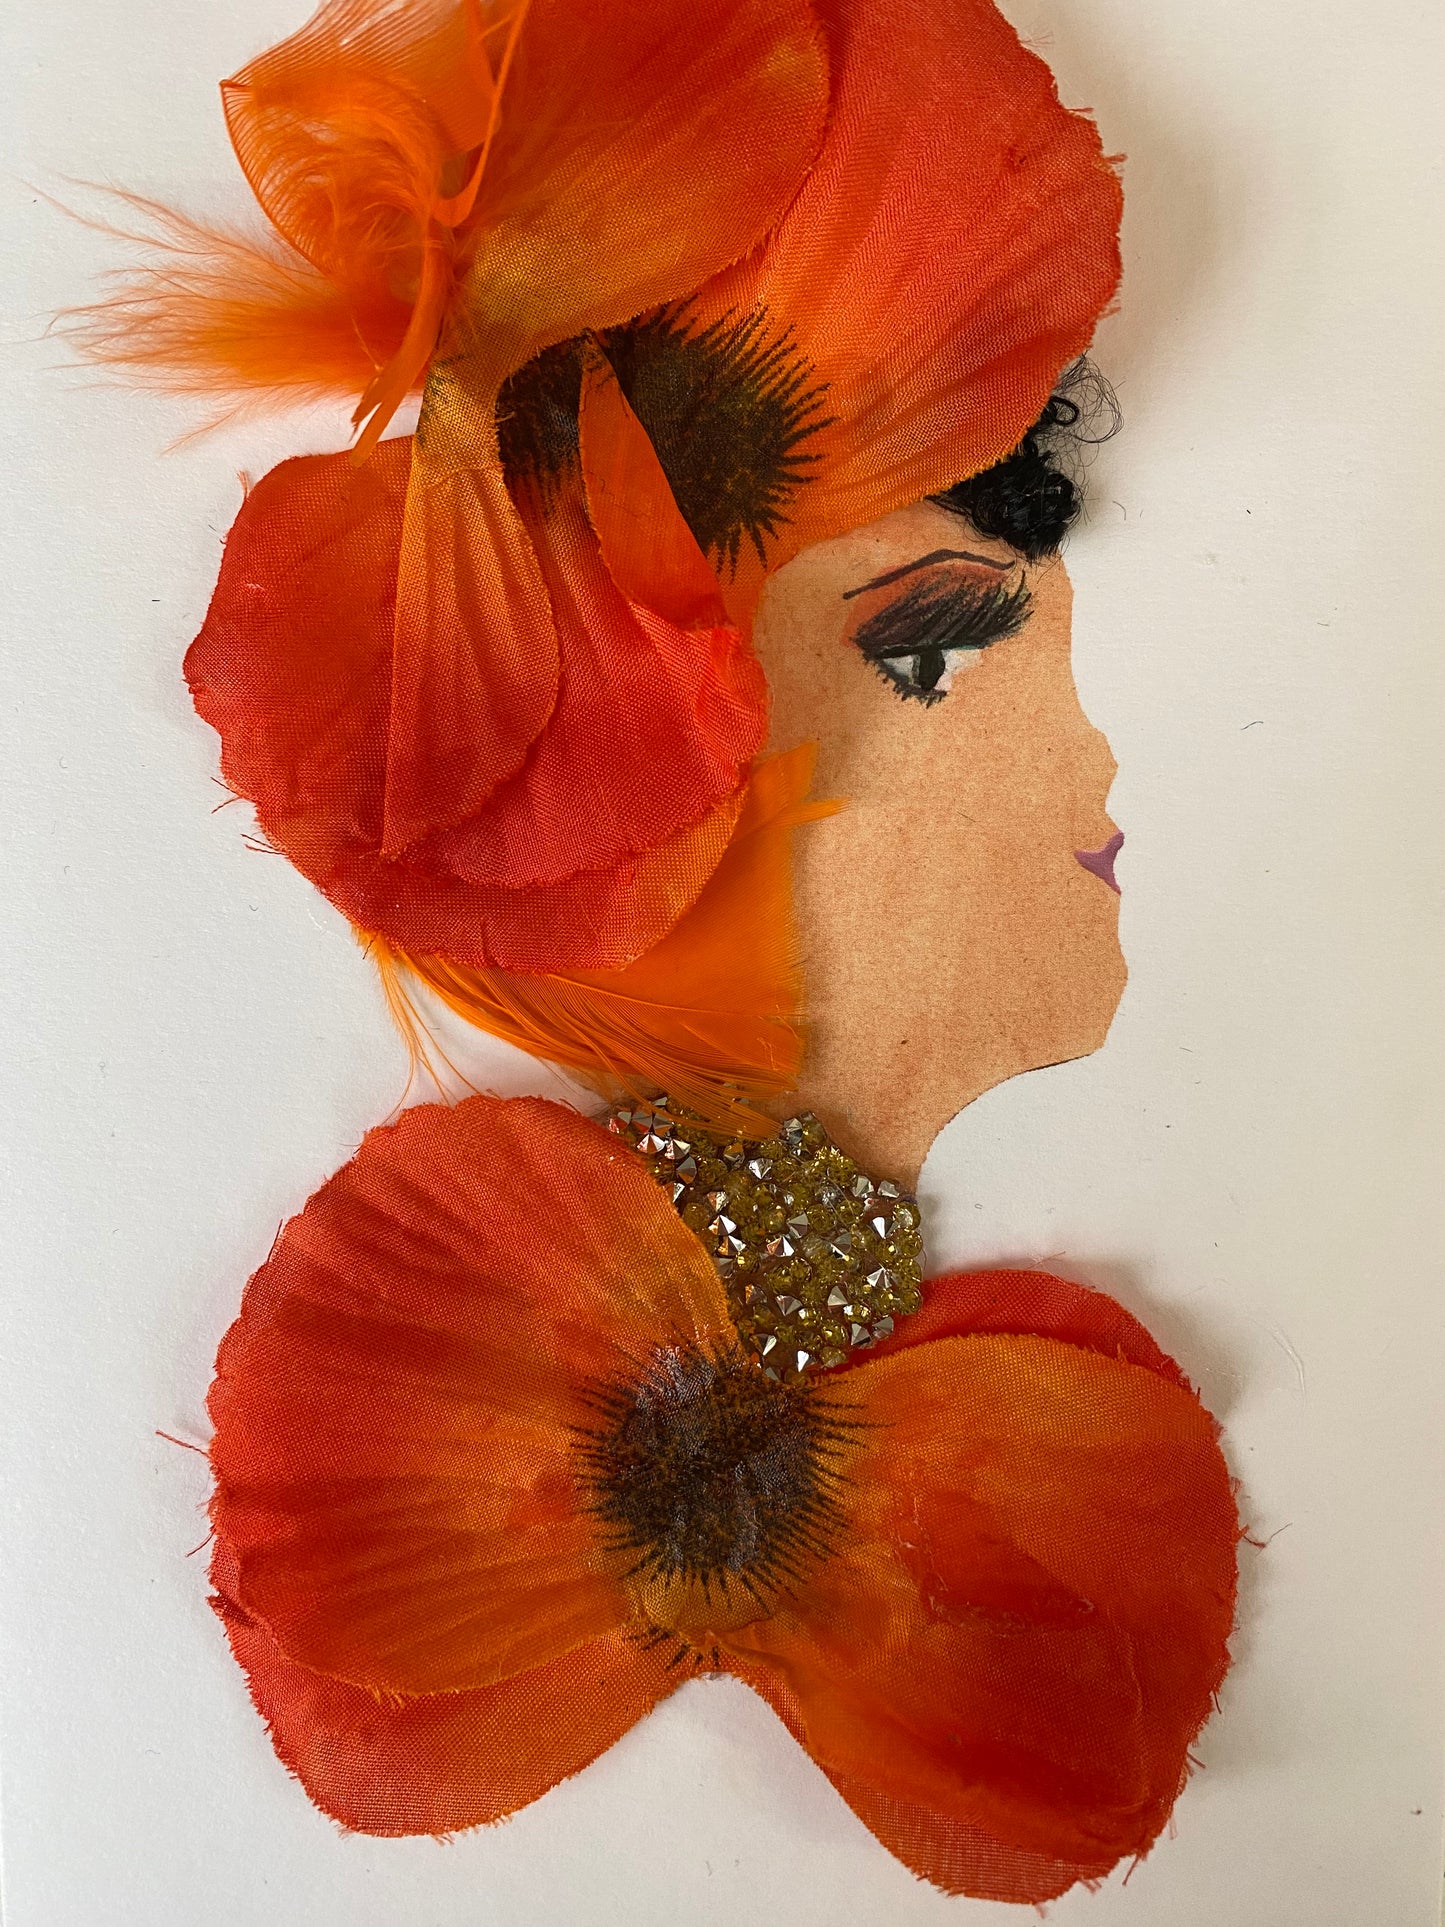 I designed this card of a woman named Hannah Honey. She has a white skin tone and wears a bright and dark orange hatinator with orange feathers. She wears a matching bright and dark orange blouse. She wears stunning silver jewellery.